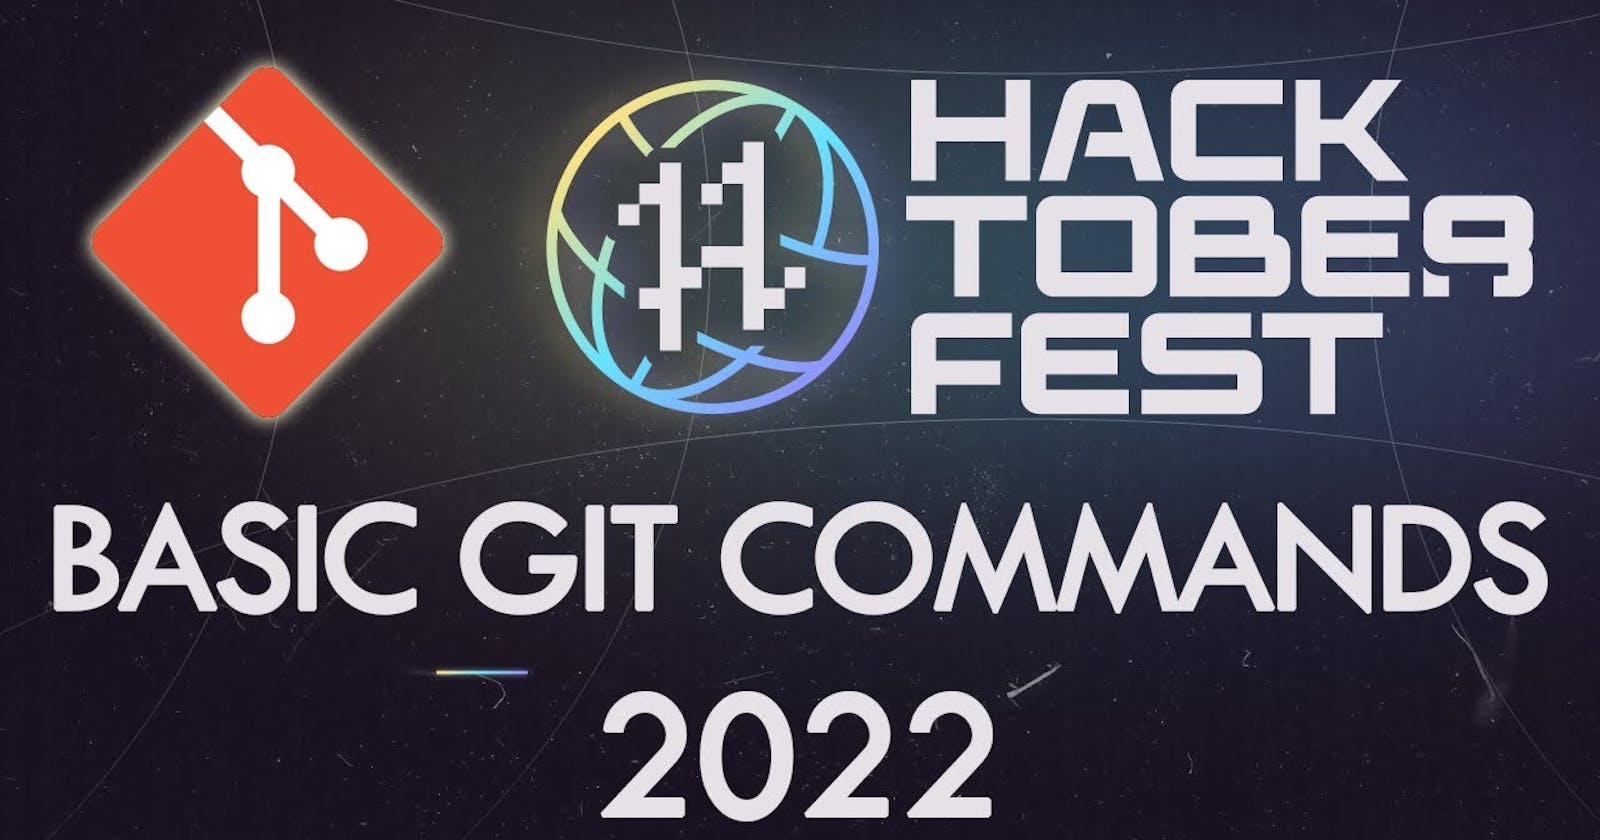 5+1 Basic GIT Commands you Need for Hacktoberfest 2022